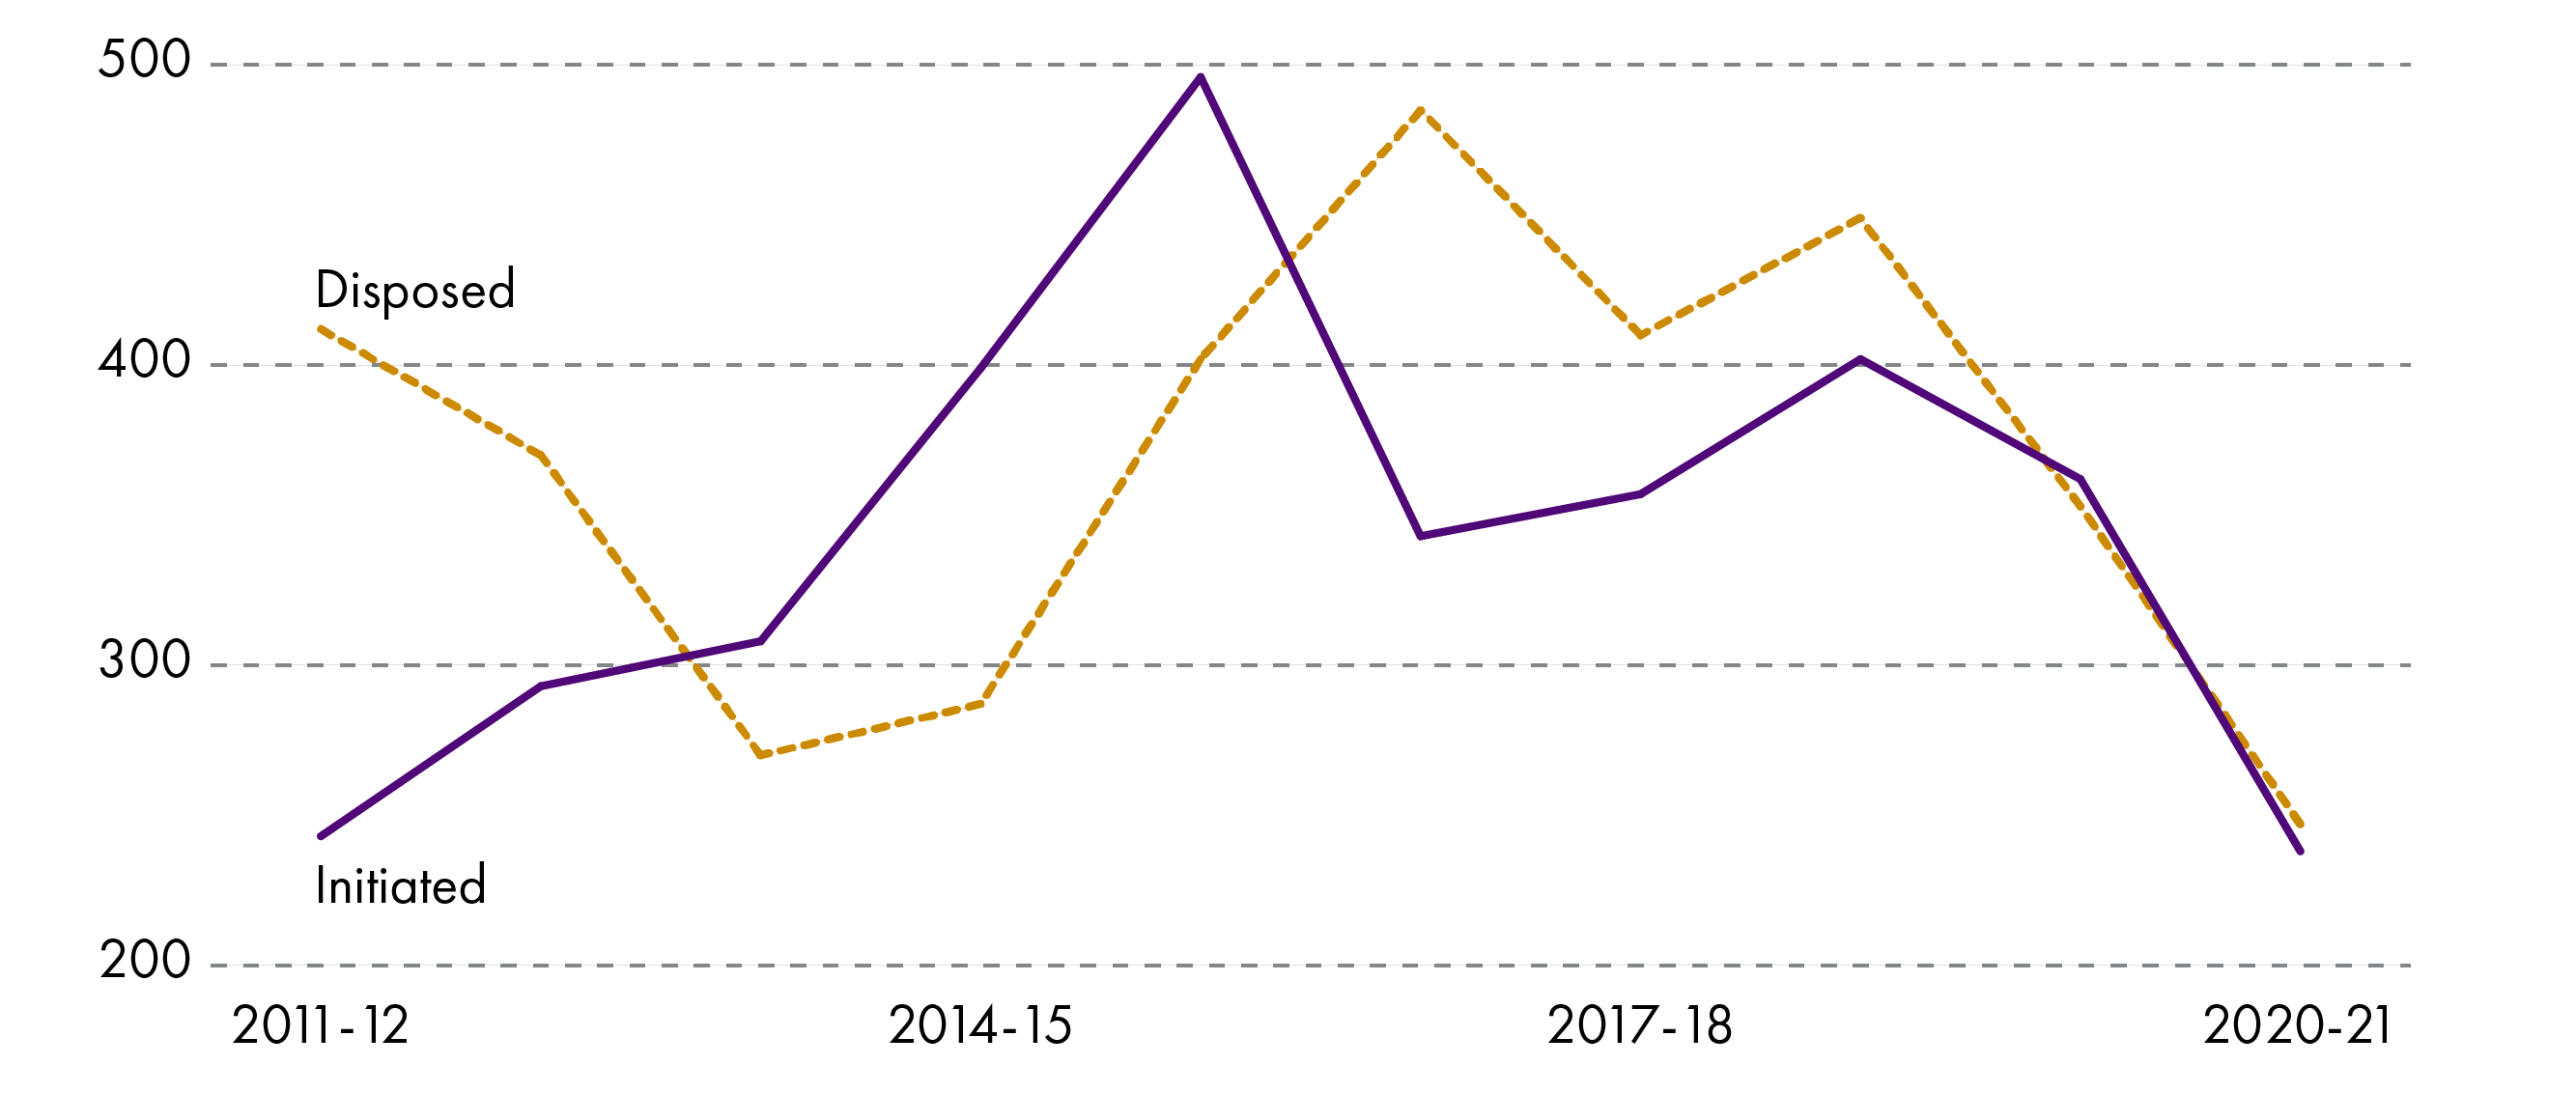 This is a line graph showing, with a purple line, the number of judicial cases begun in Scotland over a ten year period and, with a dotted yellow line, the number of judicial review cases disposed of by the court over the same period. Cases initiated and disposed of have been variable.